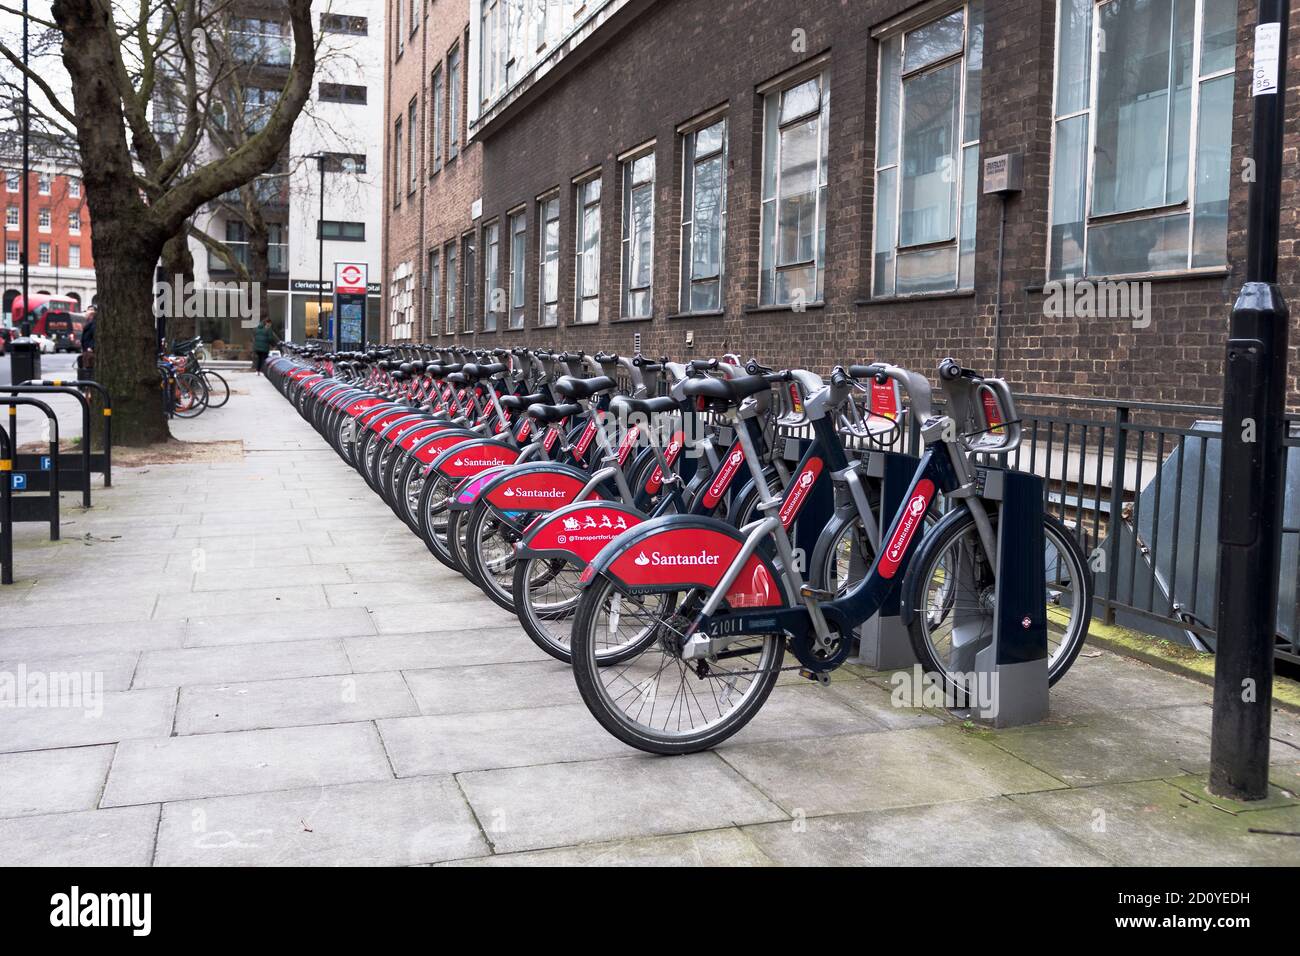 dh Bicycle stand CITY LONDON ENGLAND UK Street parked pushbikes for hire england bikehire bikes bicycles parking rank rack Stock Photo